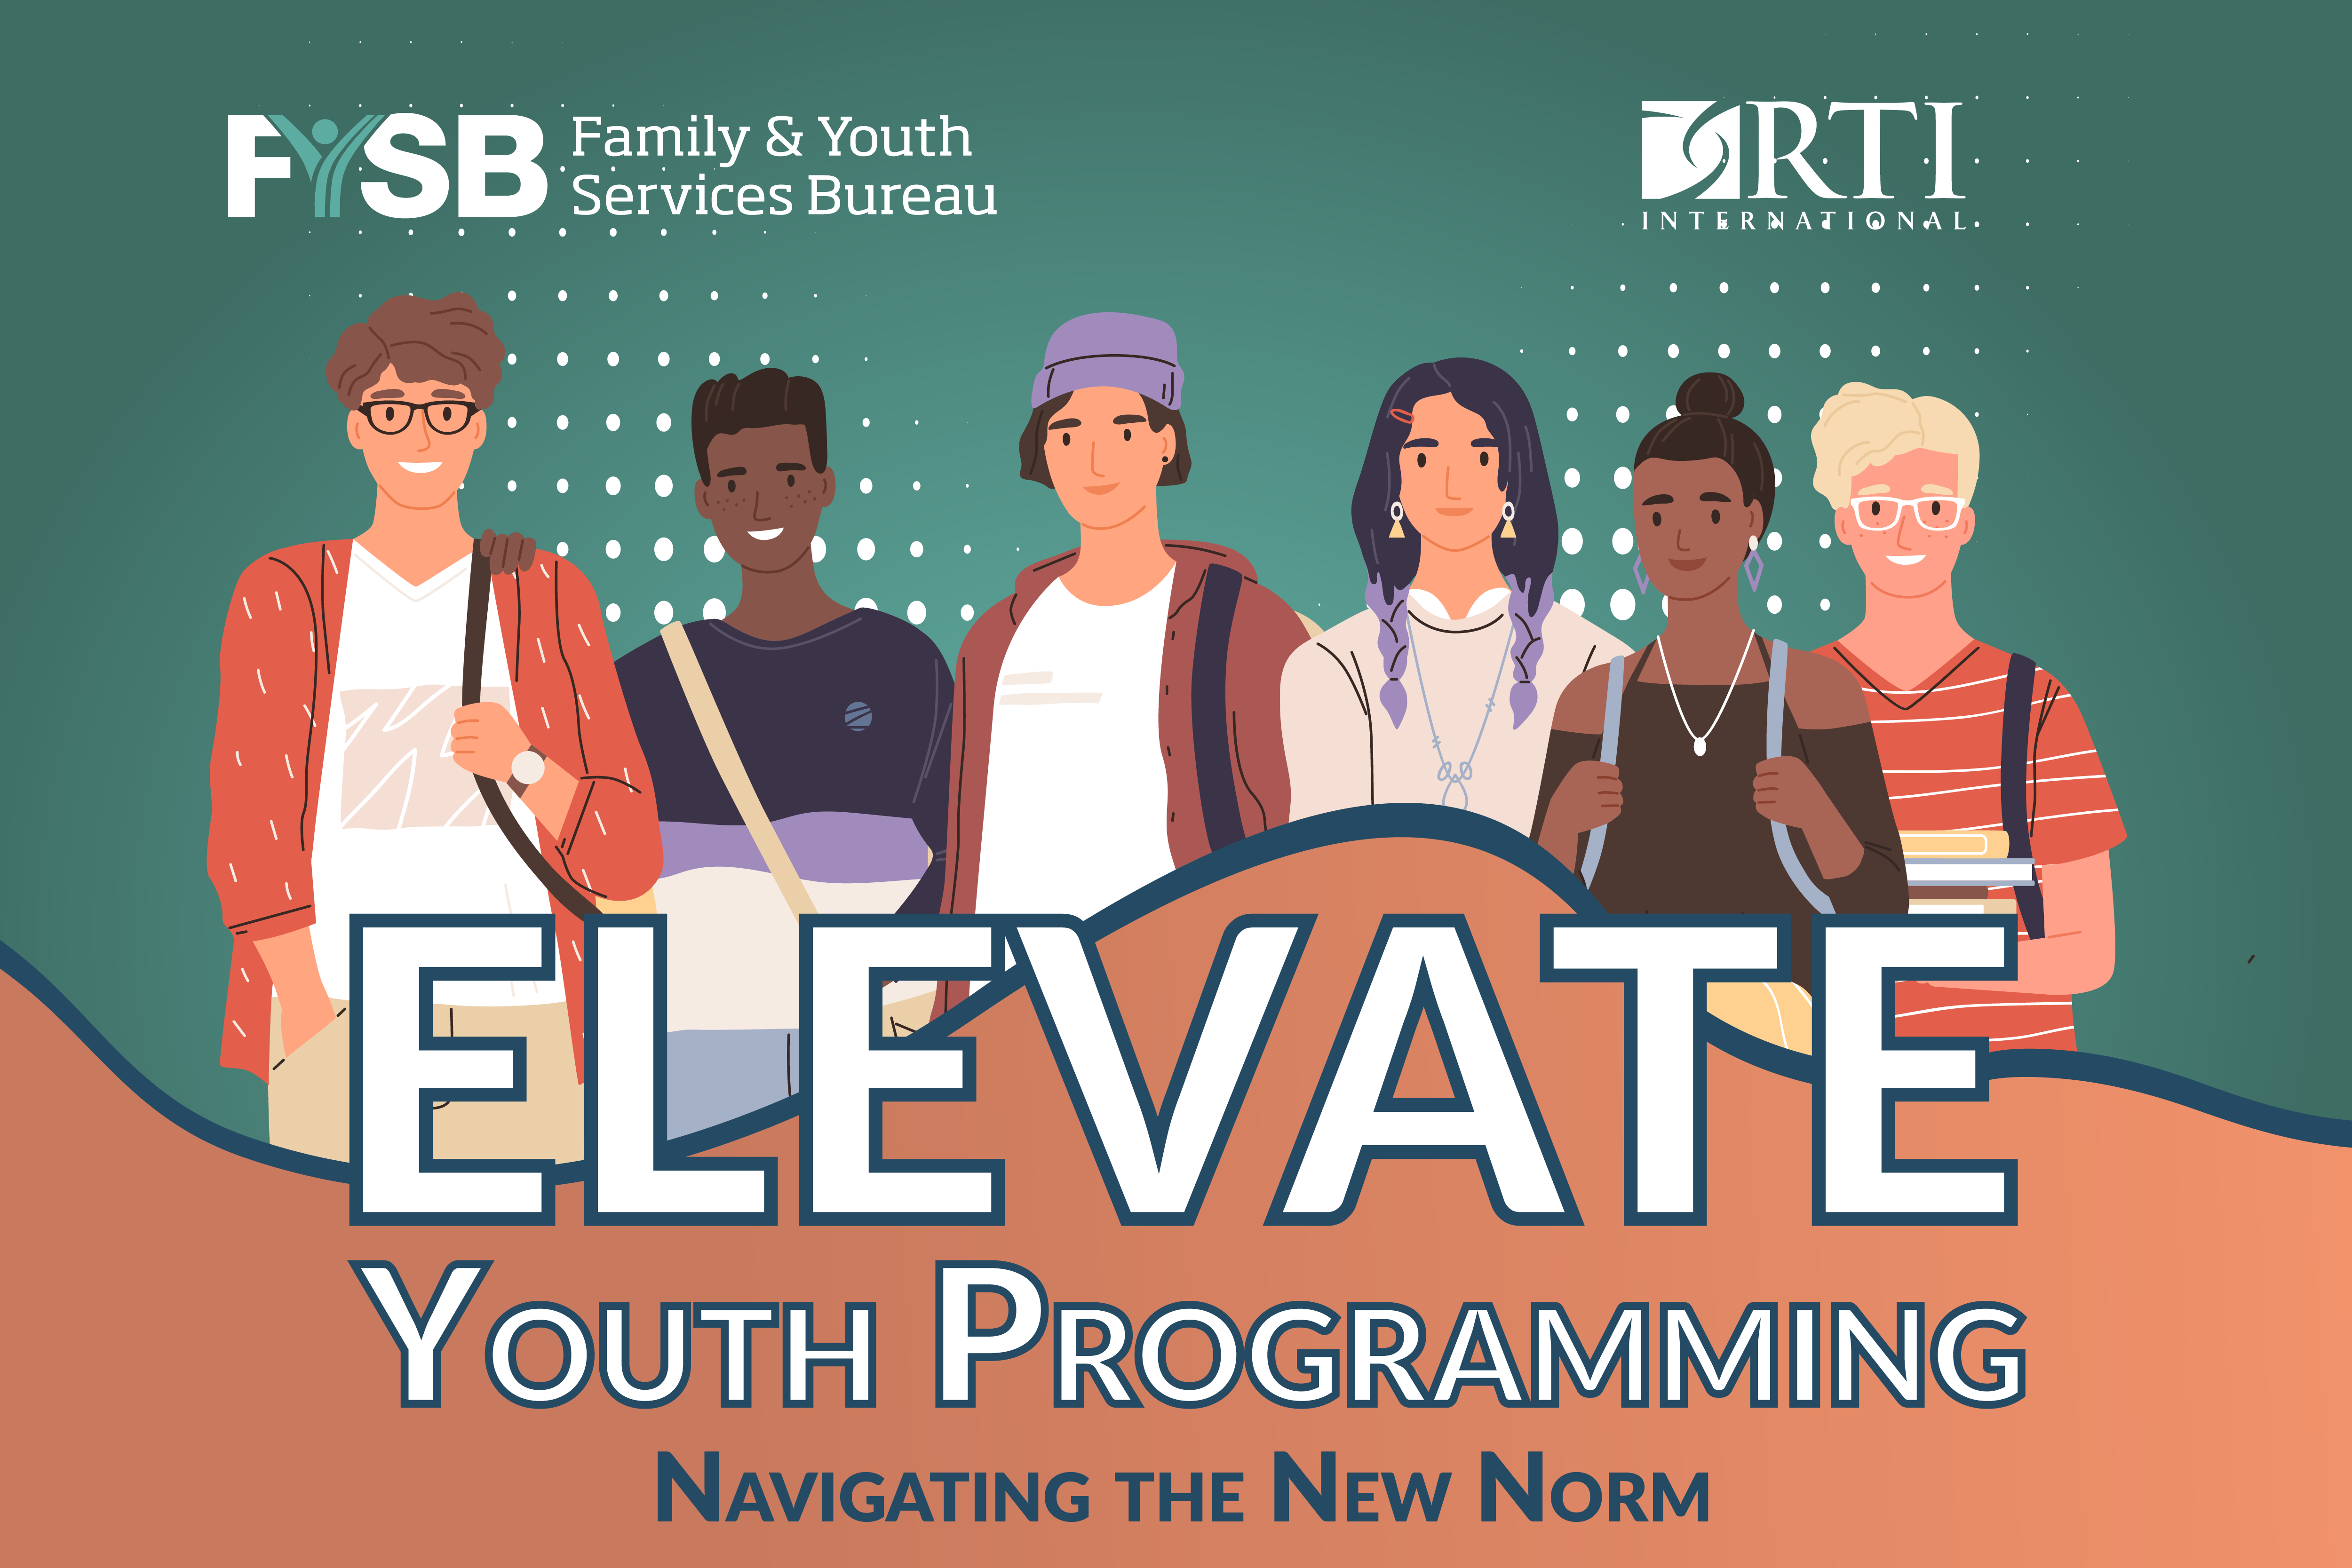 Elevate Youth Programming Navigating the New Norm